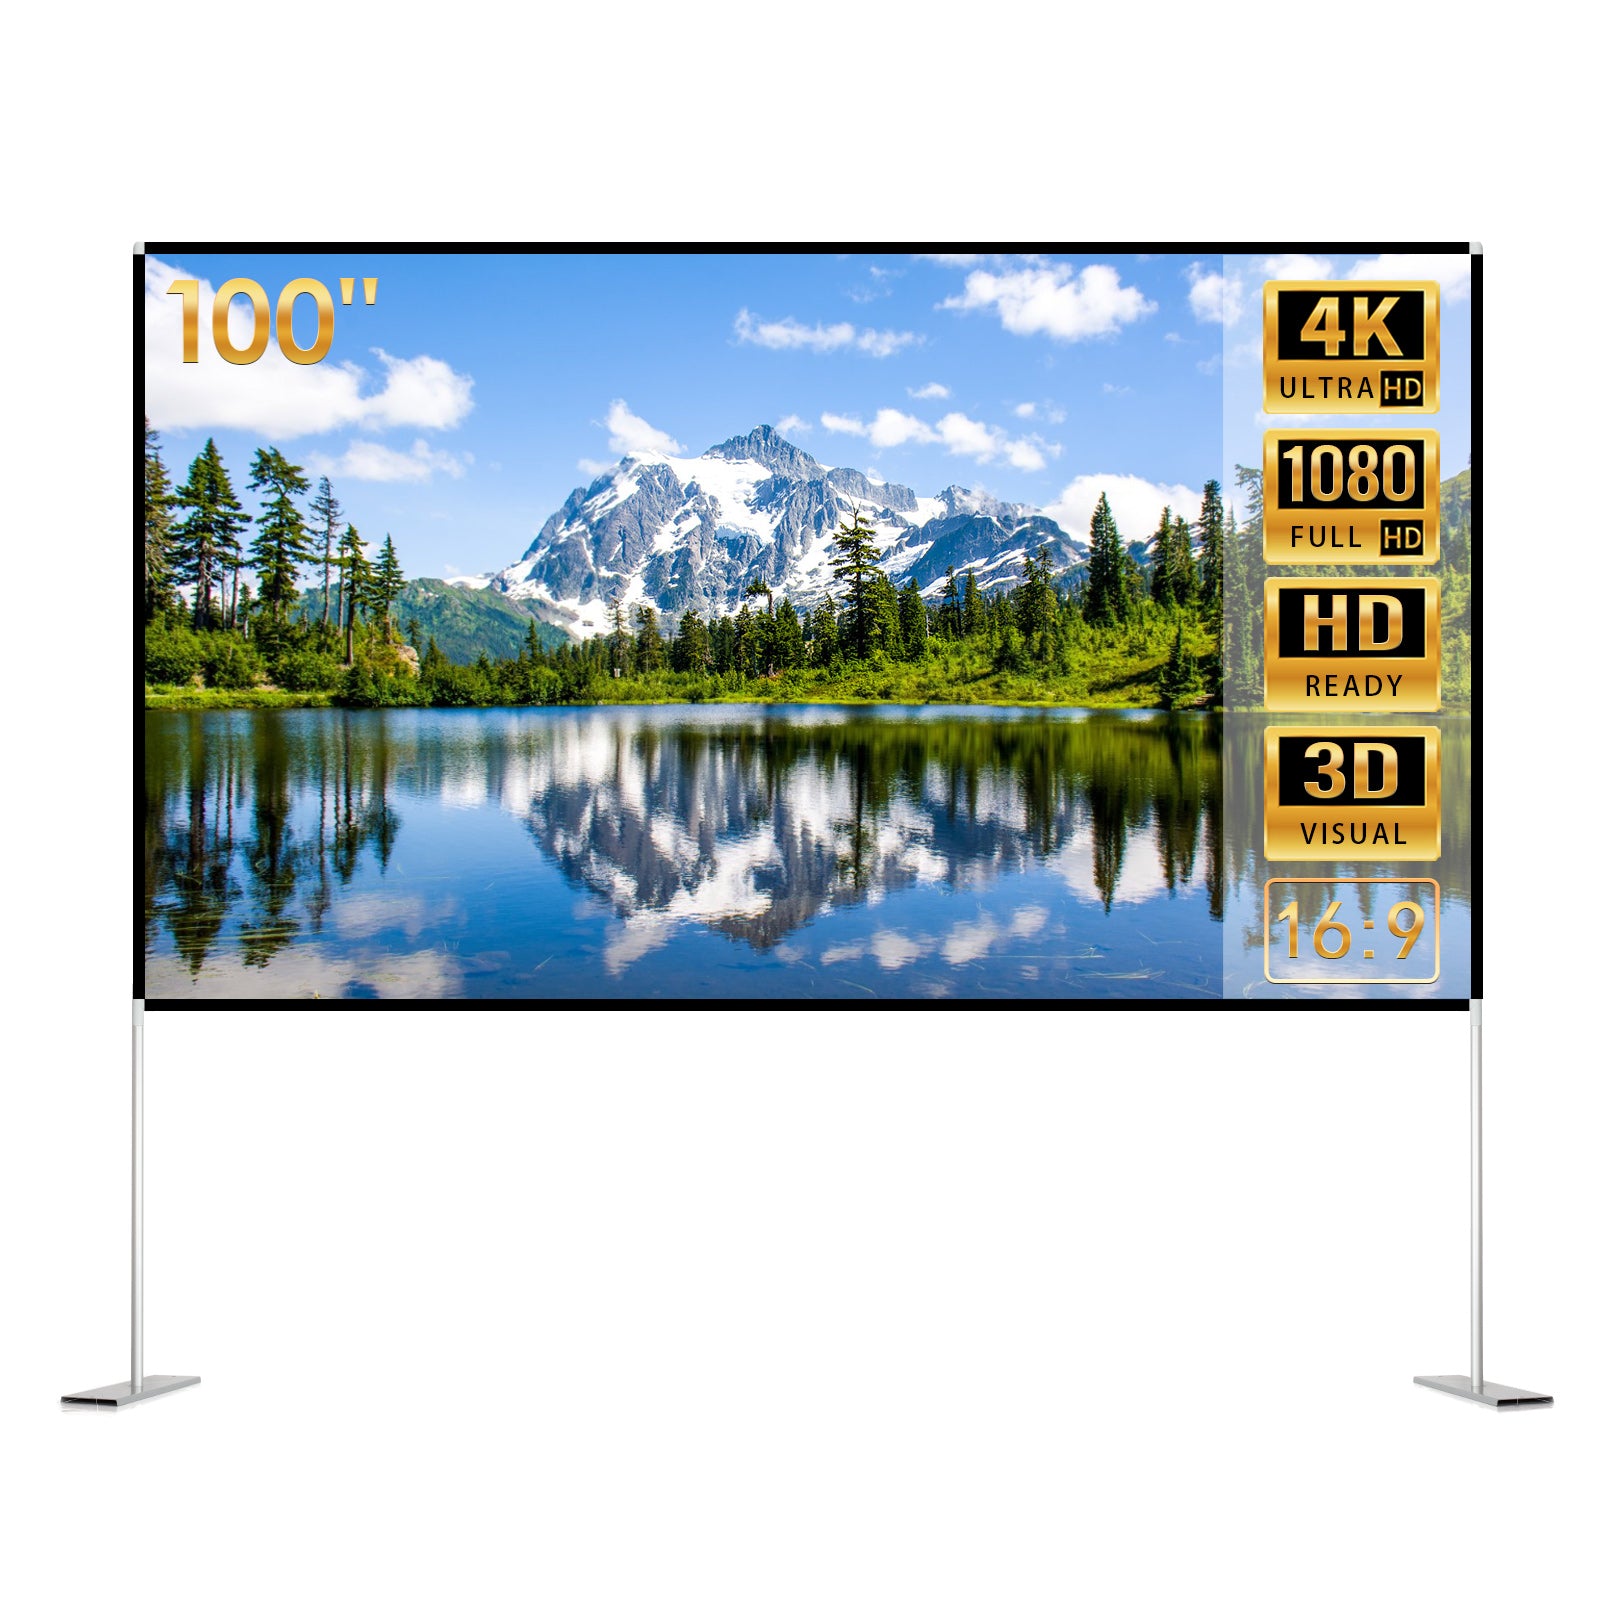 100-Inch-16-9-Projection-Screen-Foldable-Washable-Durable-Portable-Projector-Screen-4K-HD-Projector-Screen-with-Portable-Bag-for-Home-Theater-Office-Travel-100-Inch-16-9-Projection-Screen